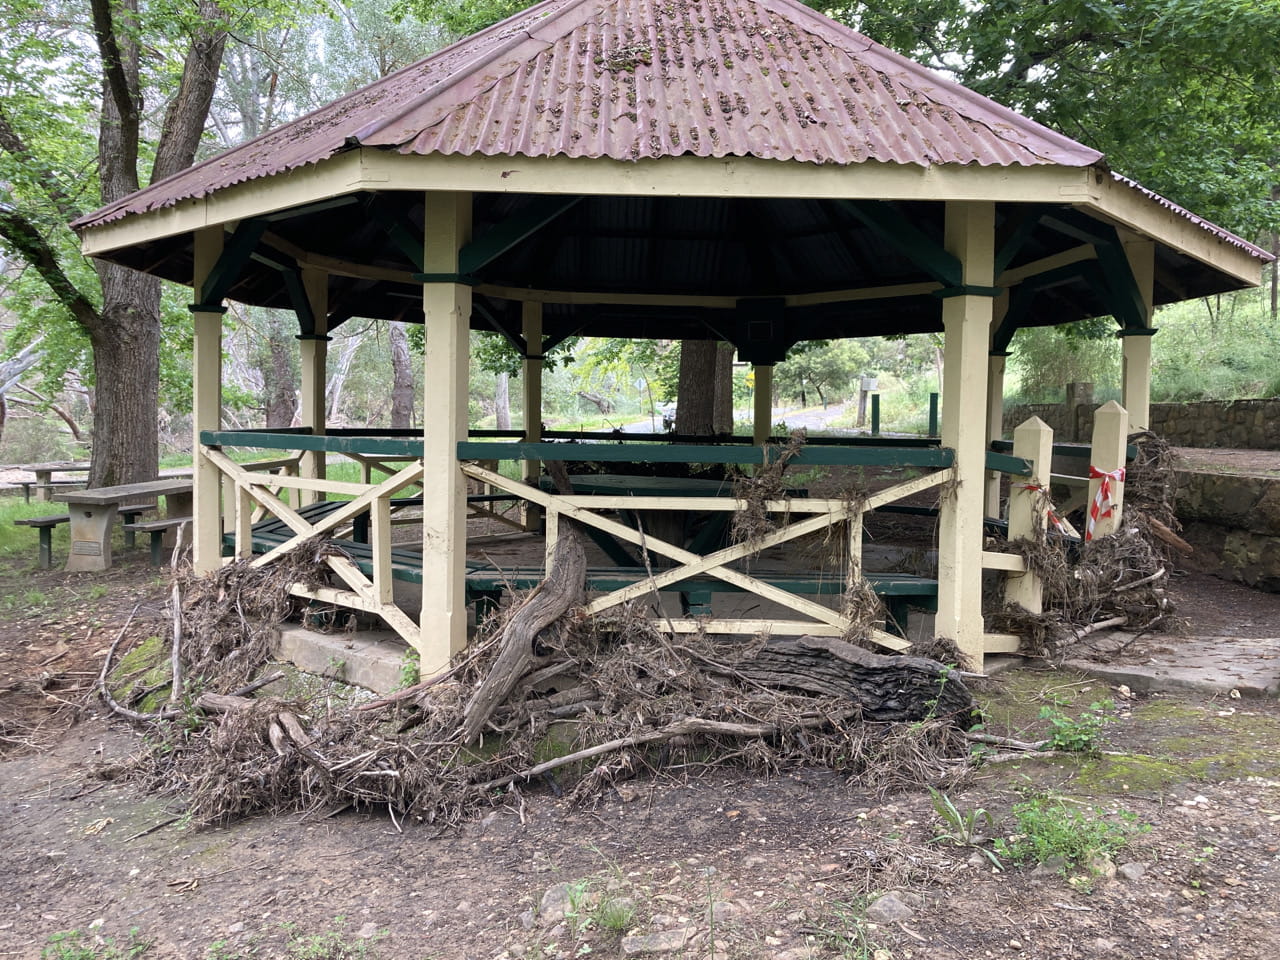 An octagonal band stand covered with branches and mud